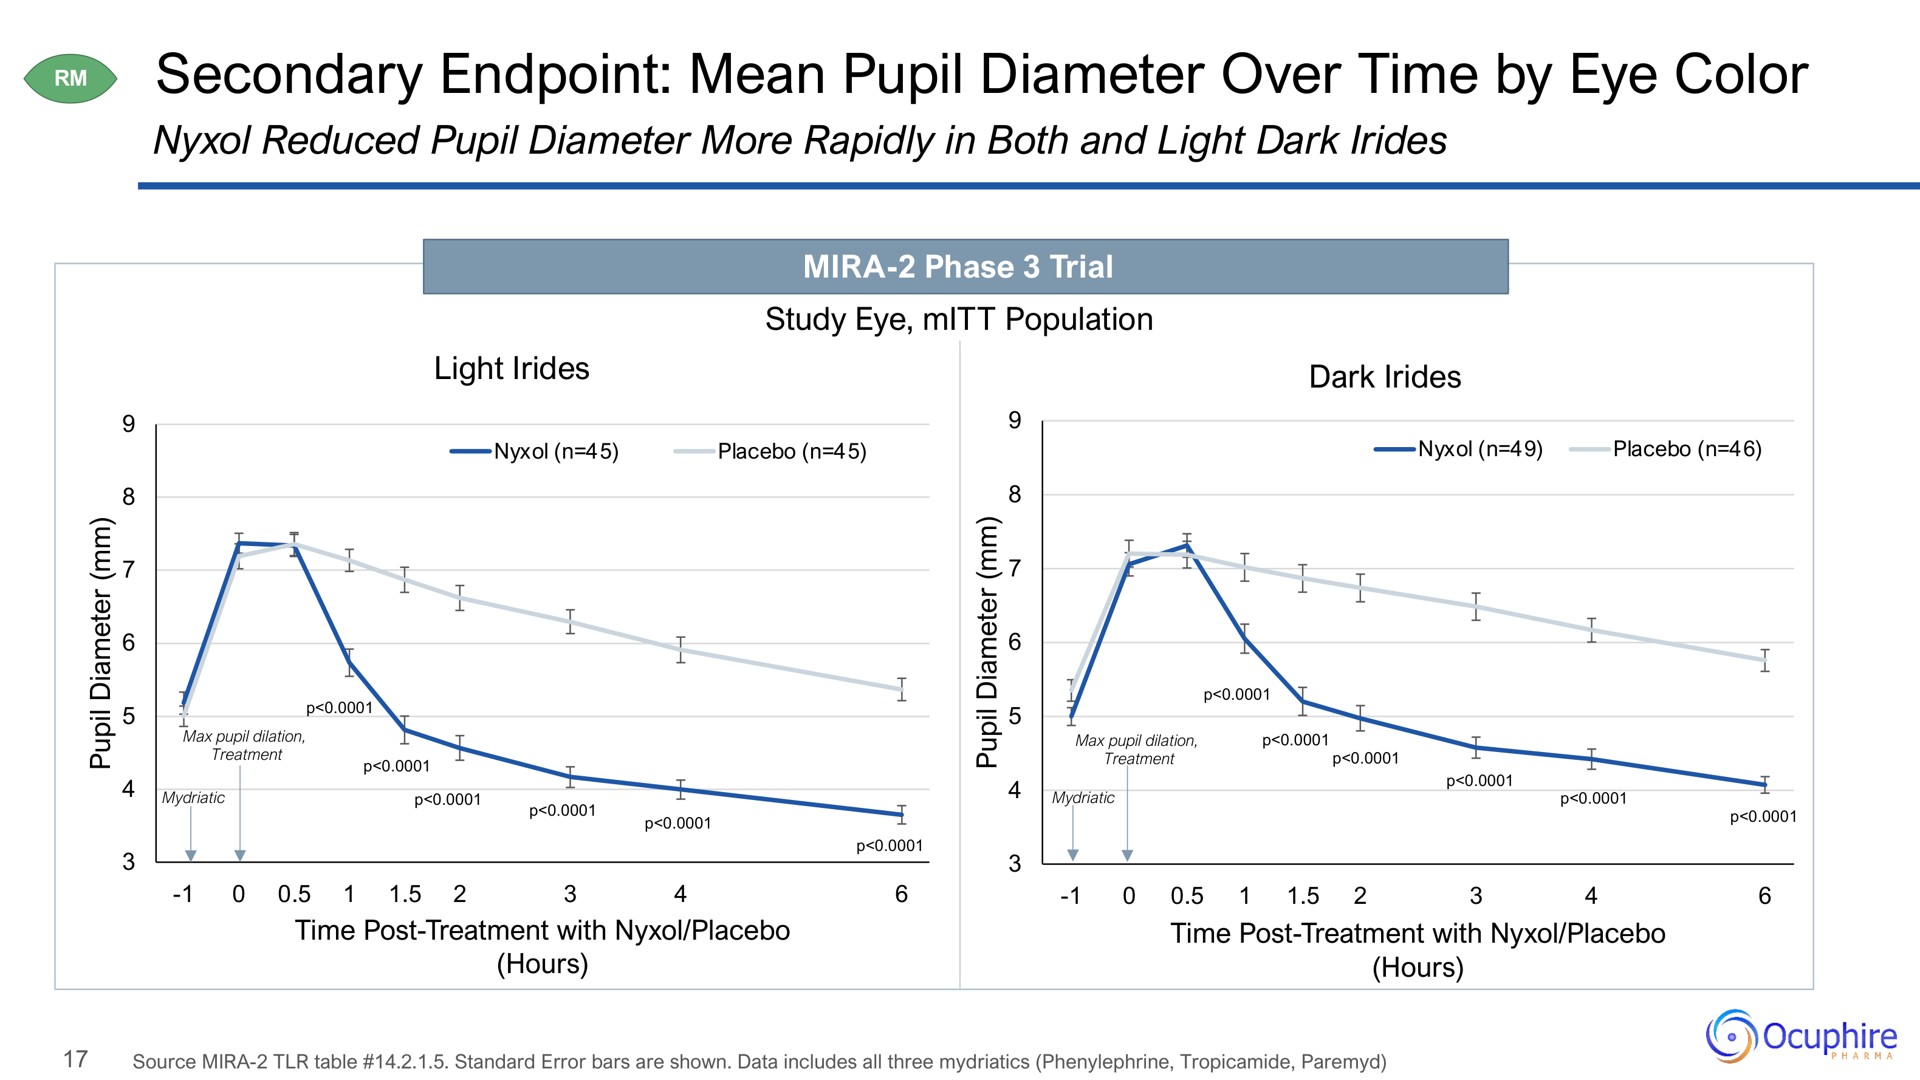 secondary mean pupil diameter over time by eye color | Ocuphire Pharma